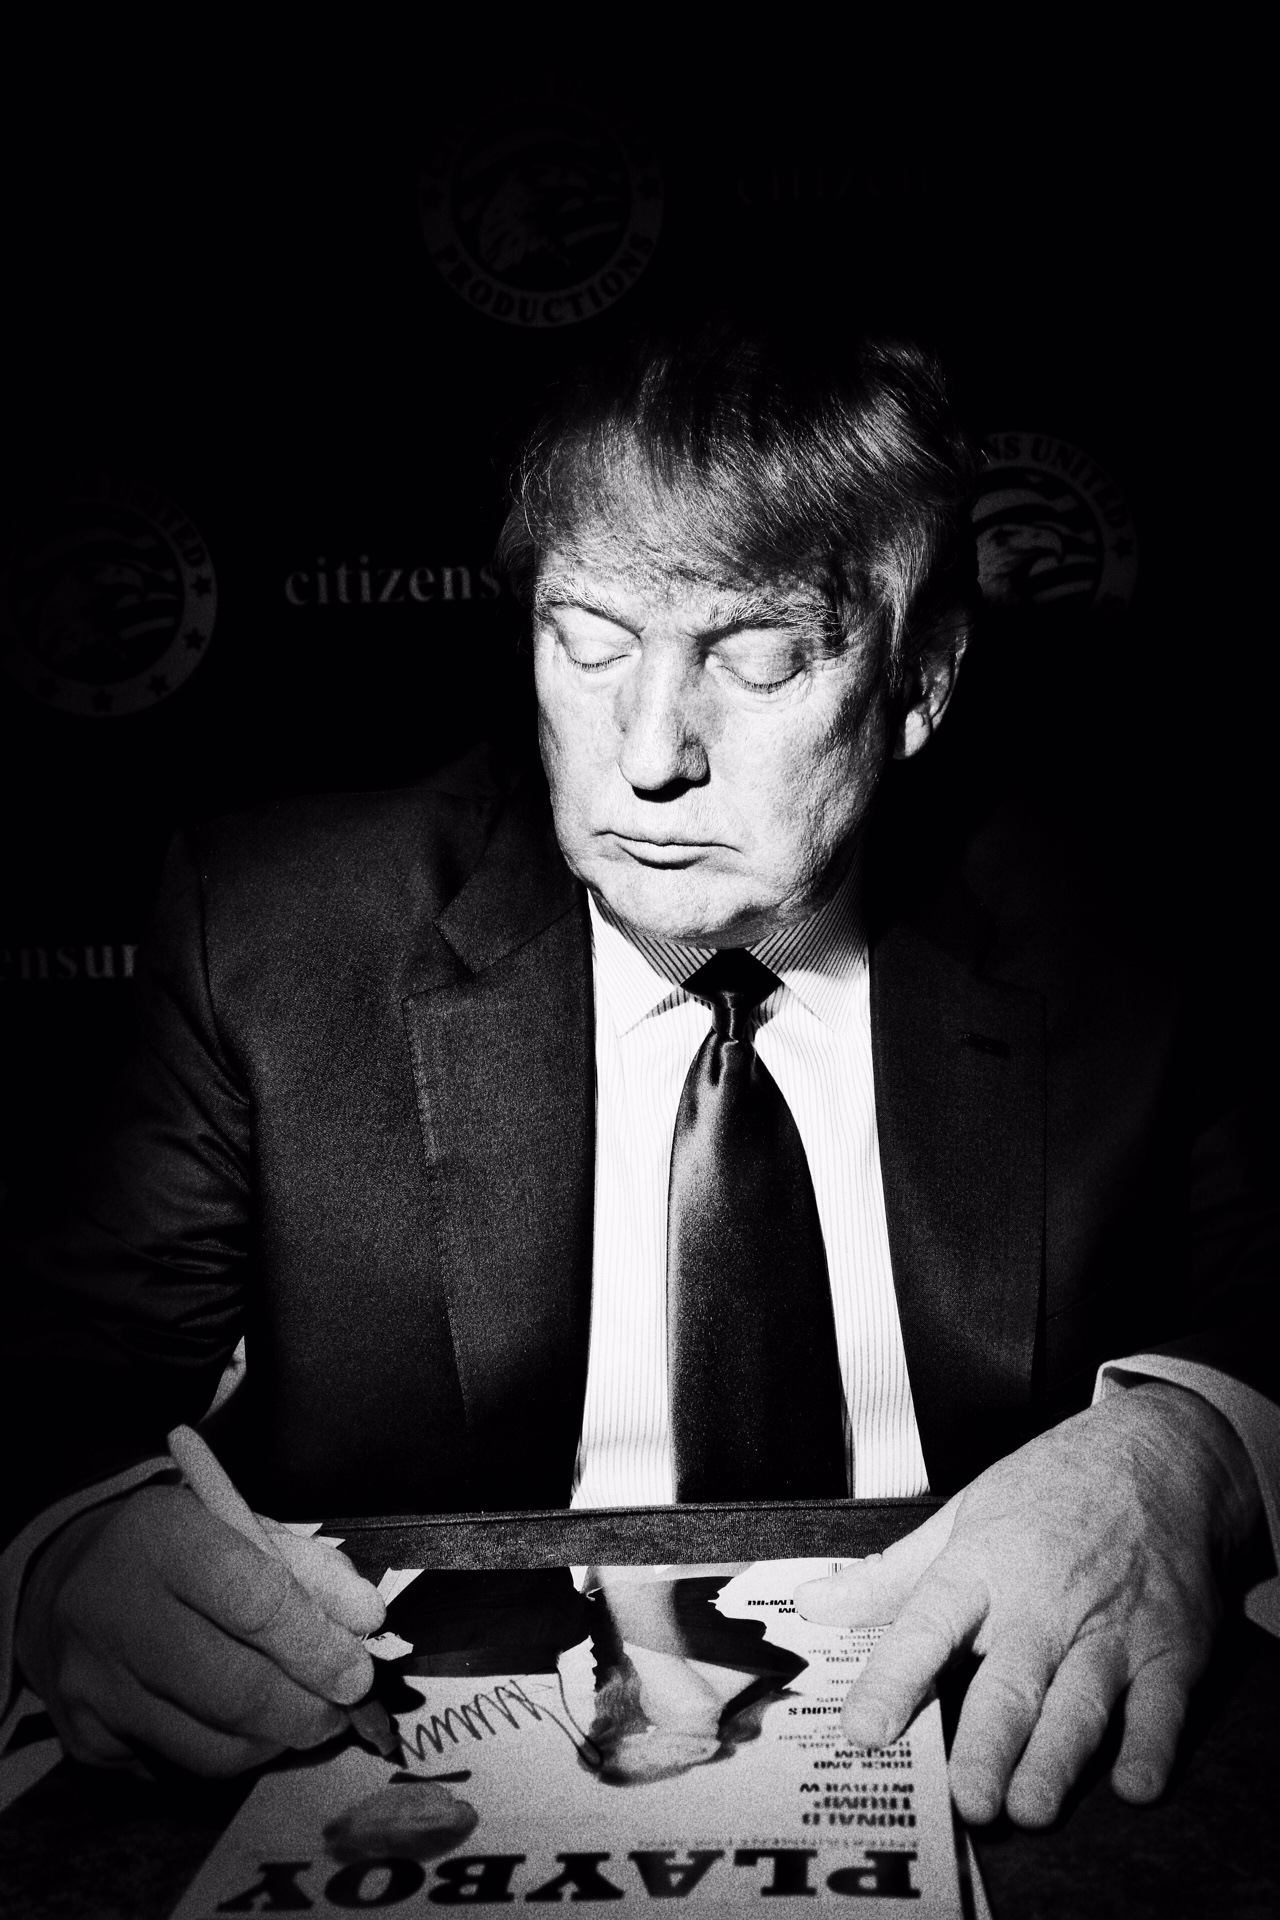 Donald Trump signs a Playboy magazine at CPAC in National Harbor, Md. on Feb. 27, 2015.